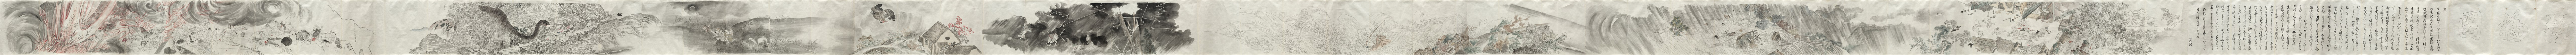 Seven Calamities, 1773. Nijo Yana (Japanese, 1723-1773). Handscroll; ink and color on paper;